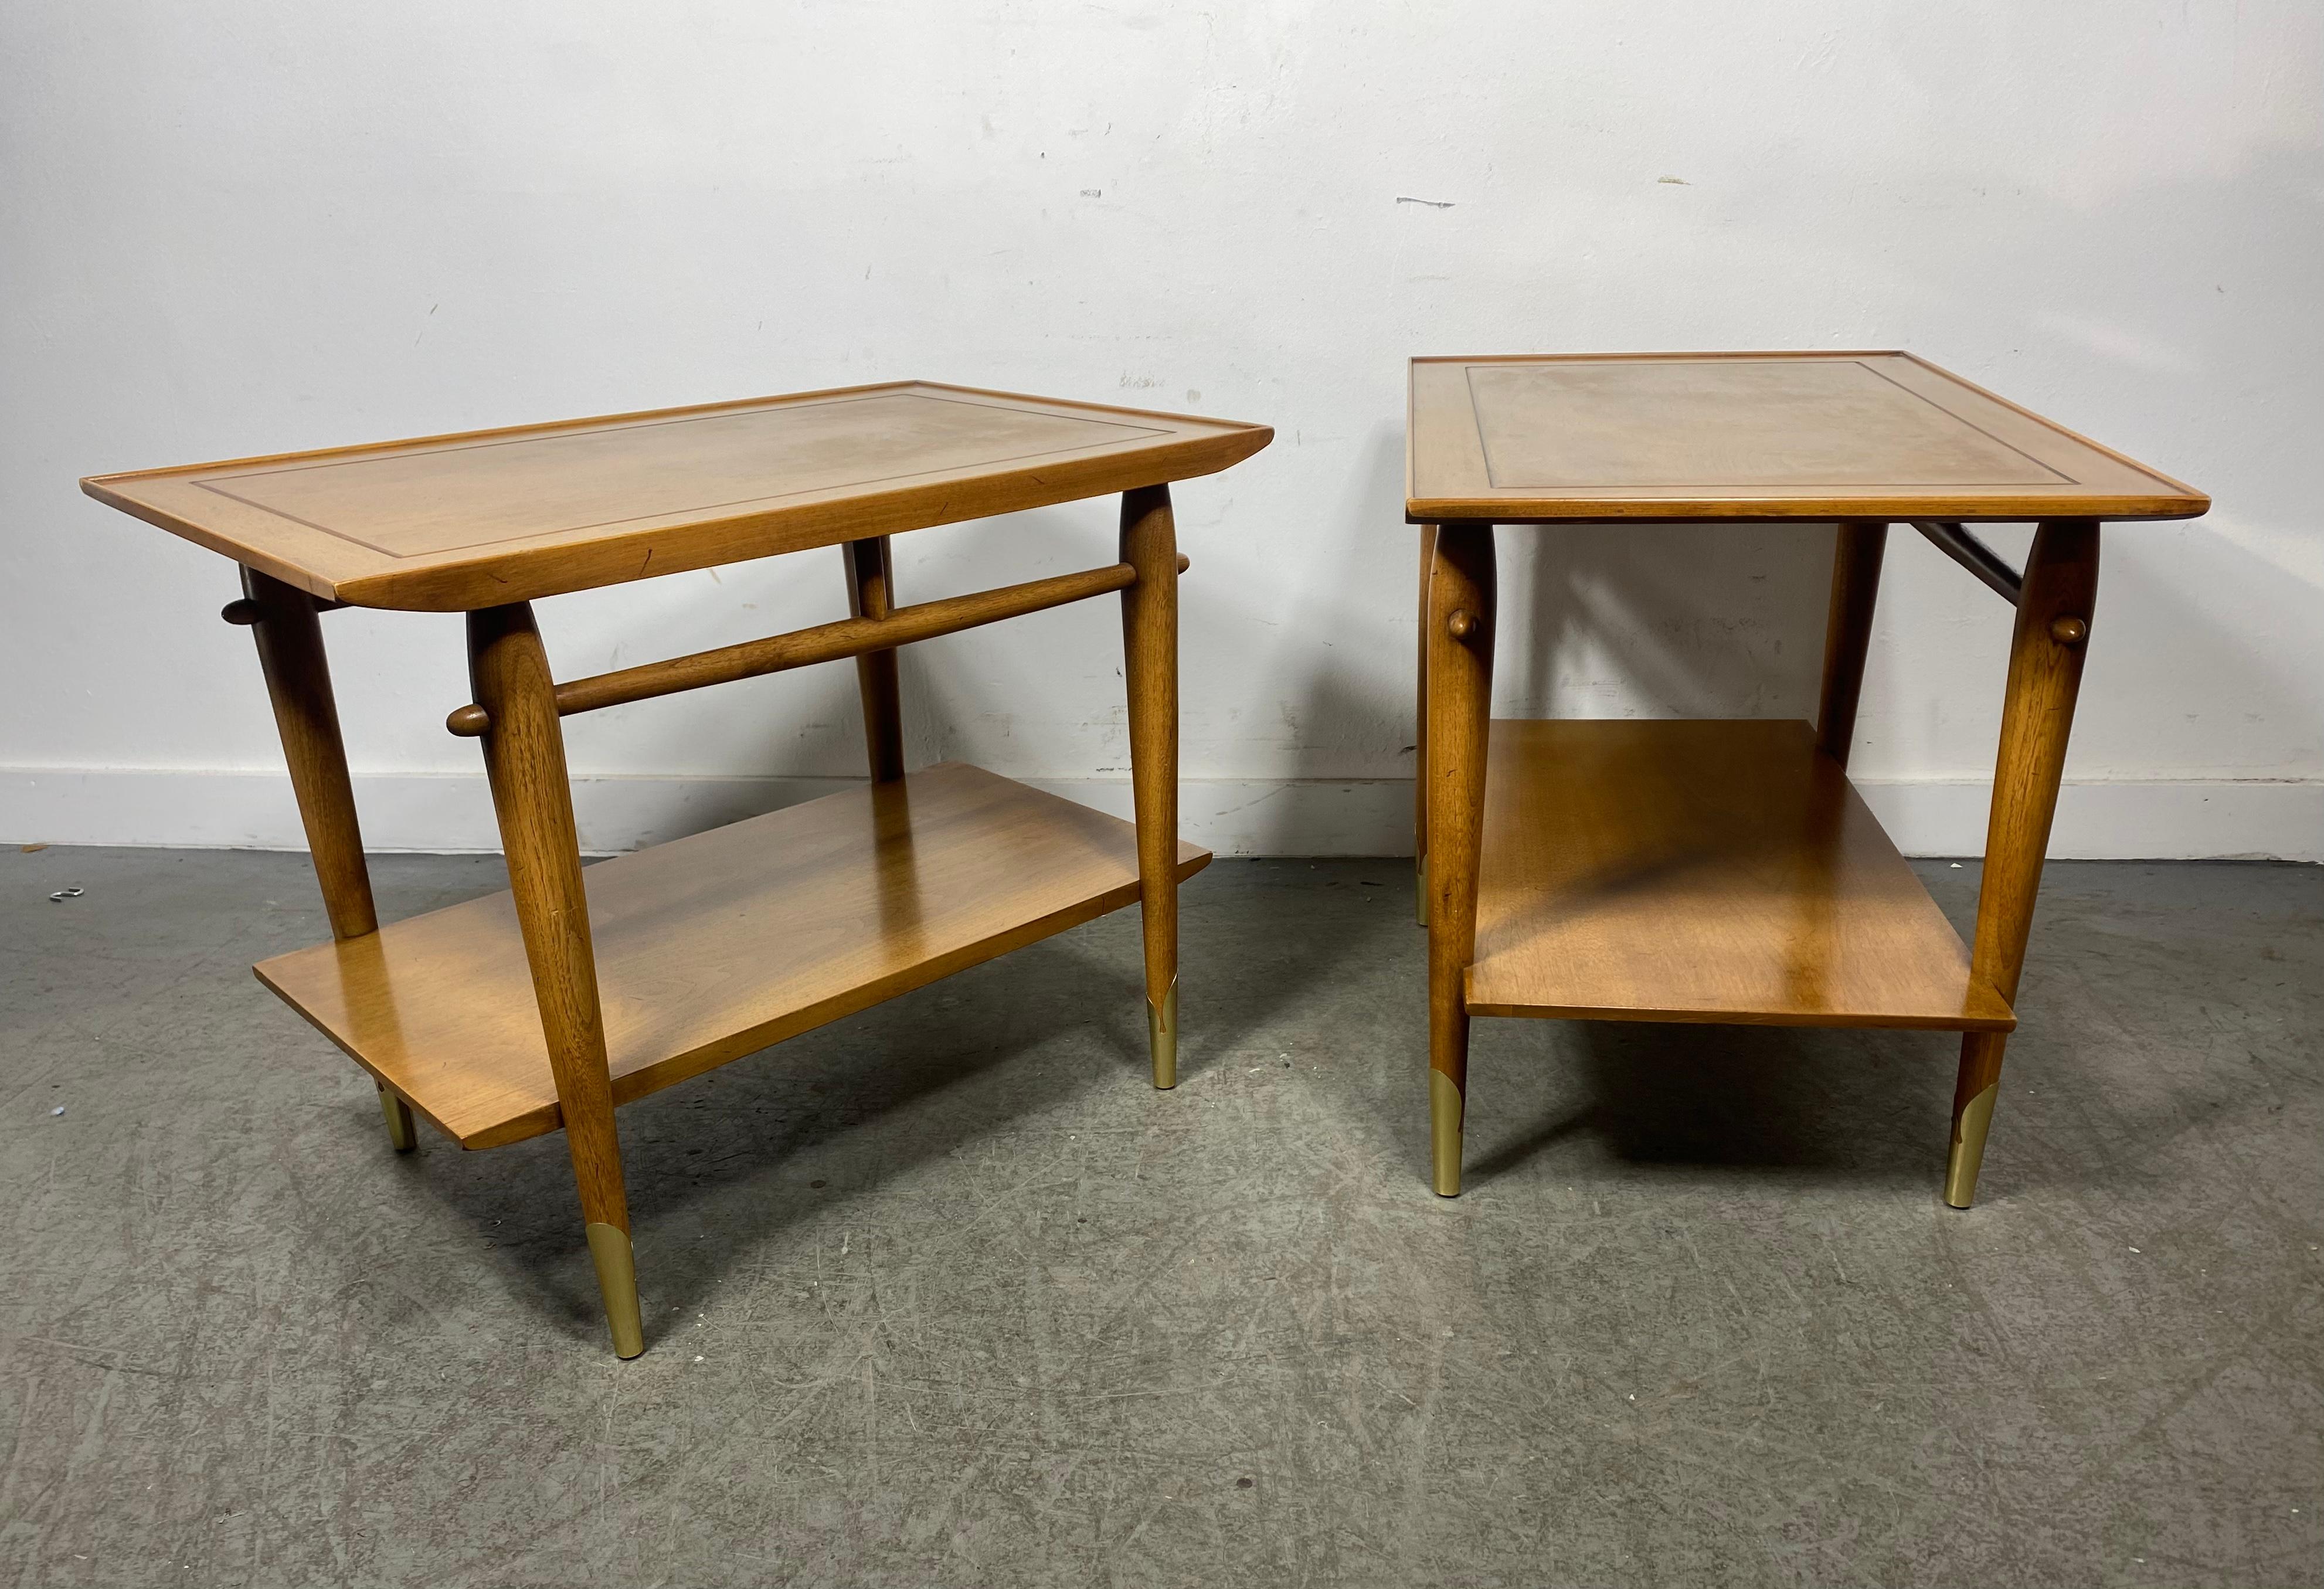 Classic Modern two-tier walnut tables by Lane from the 